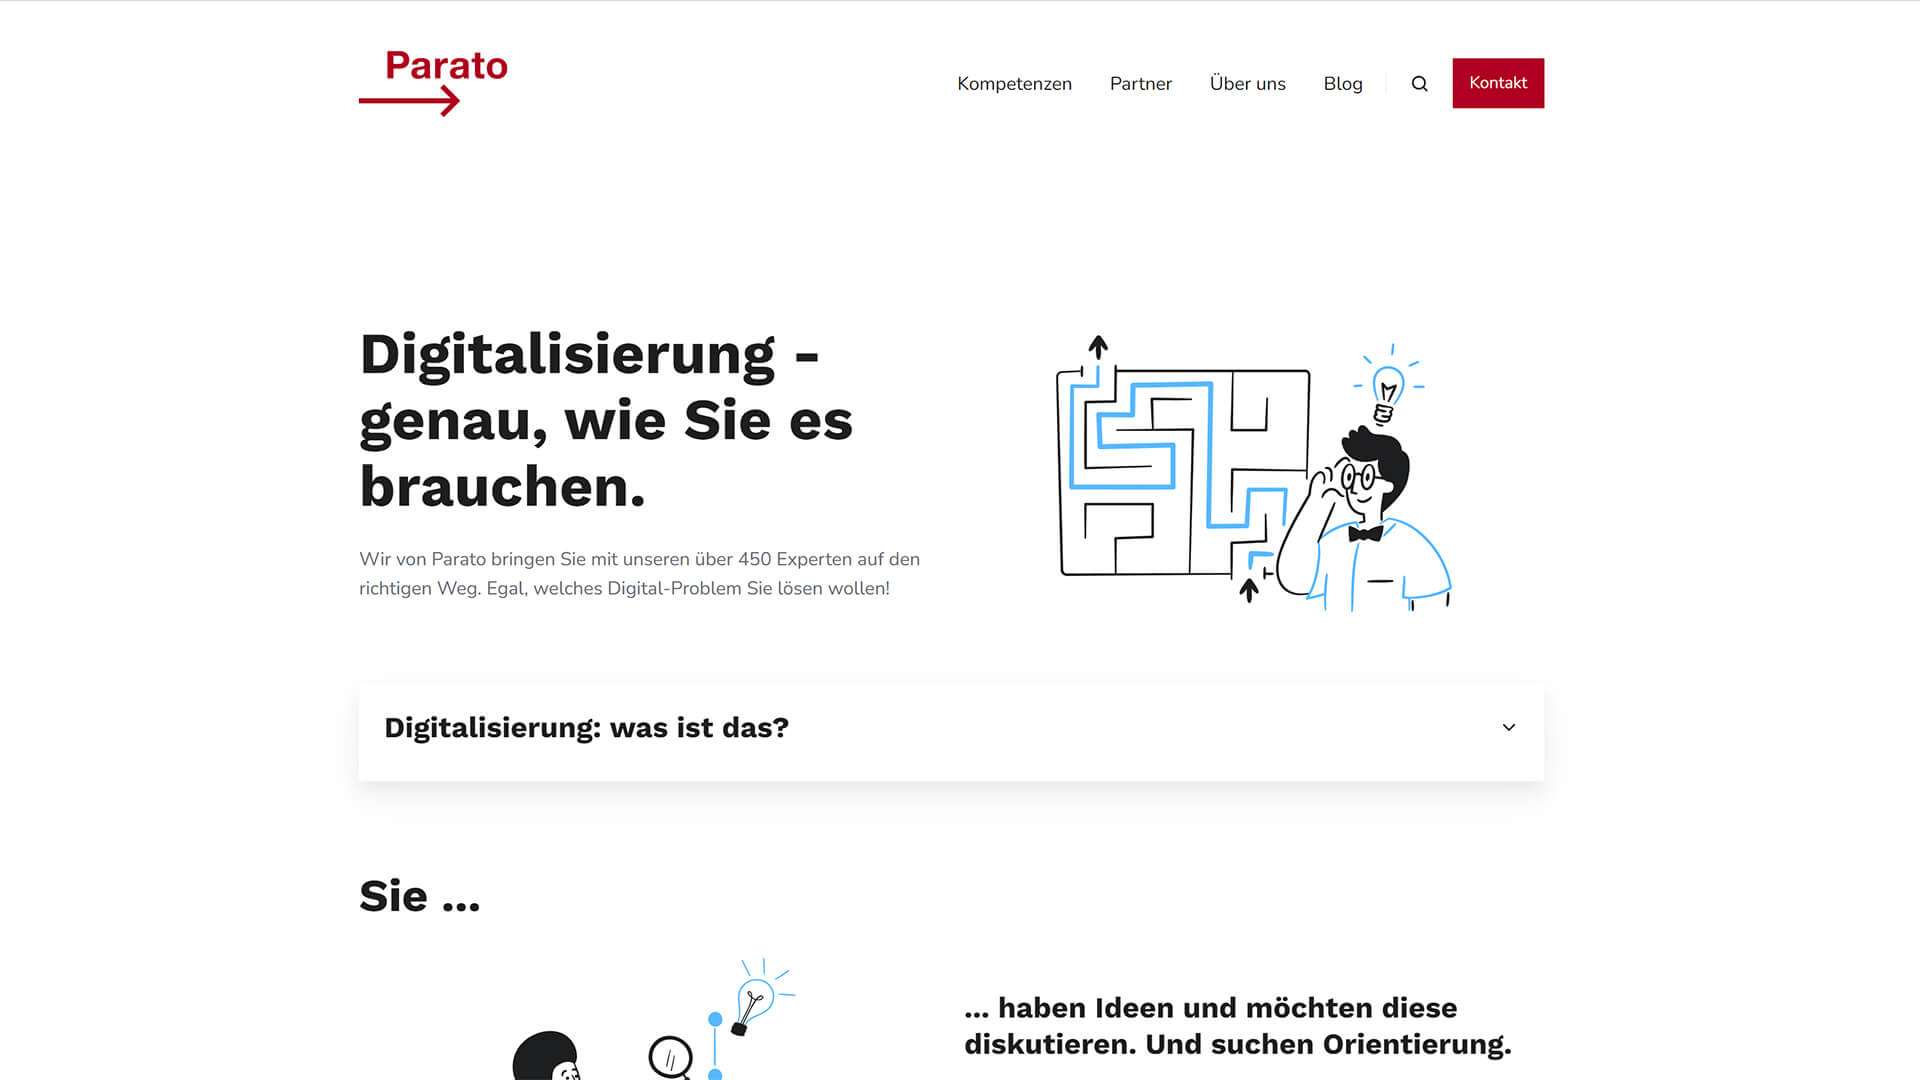 The beautiful parato.ch website created with Act3 on the HubSpot CMS